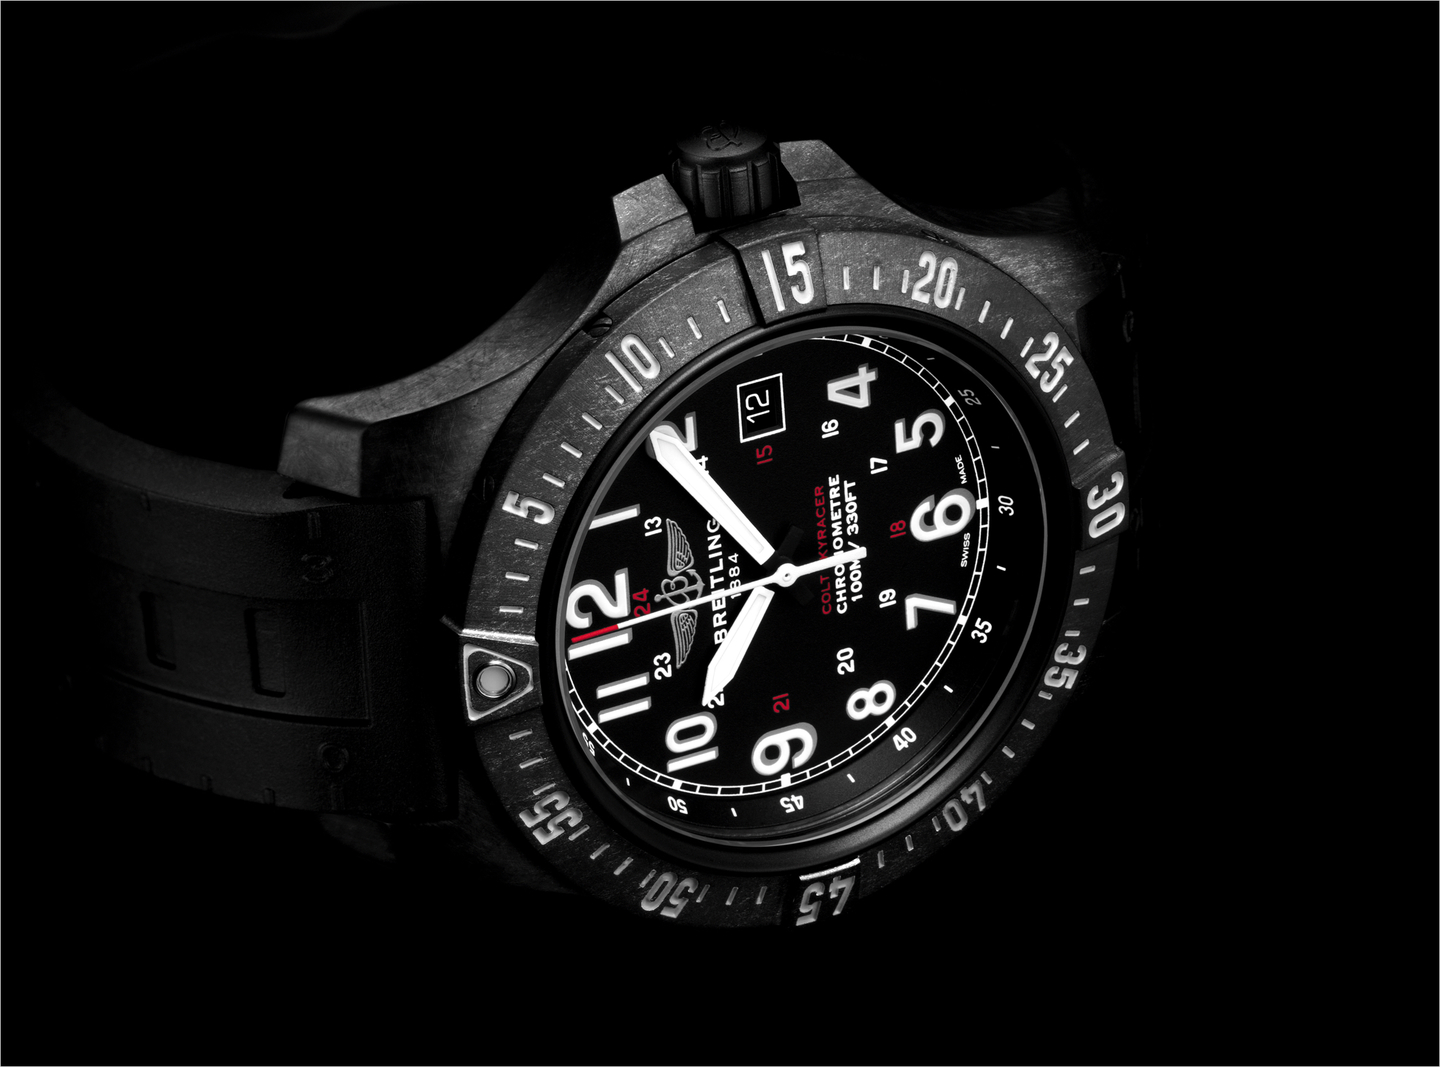 Breitling launches second watch with proprietary Breitlight case